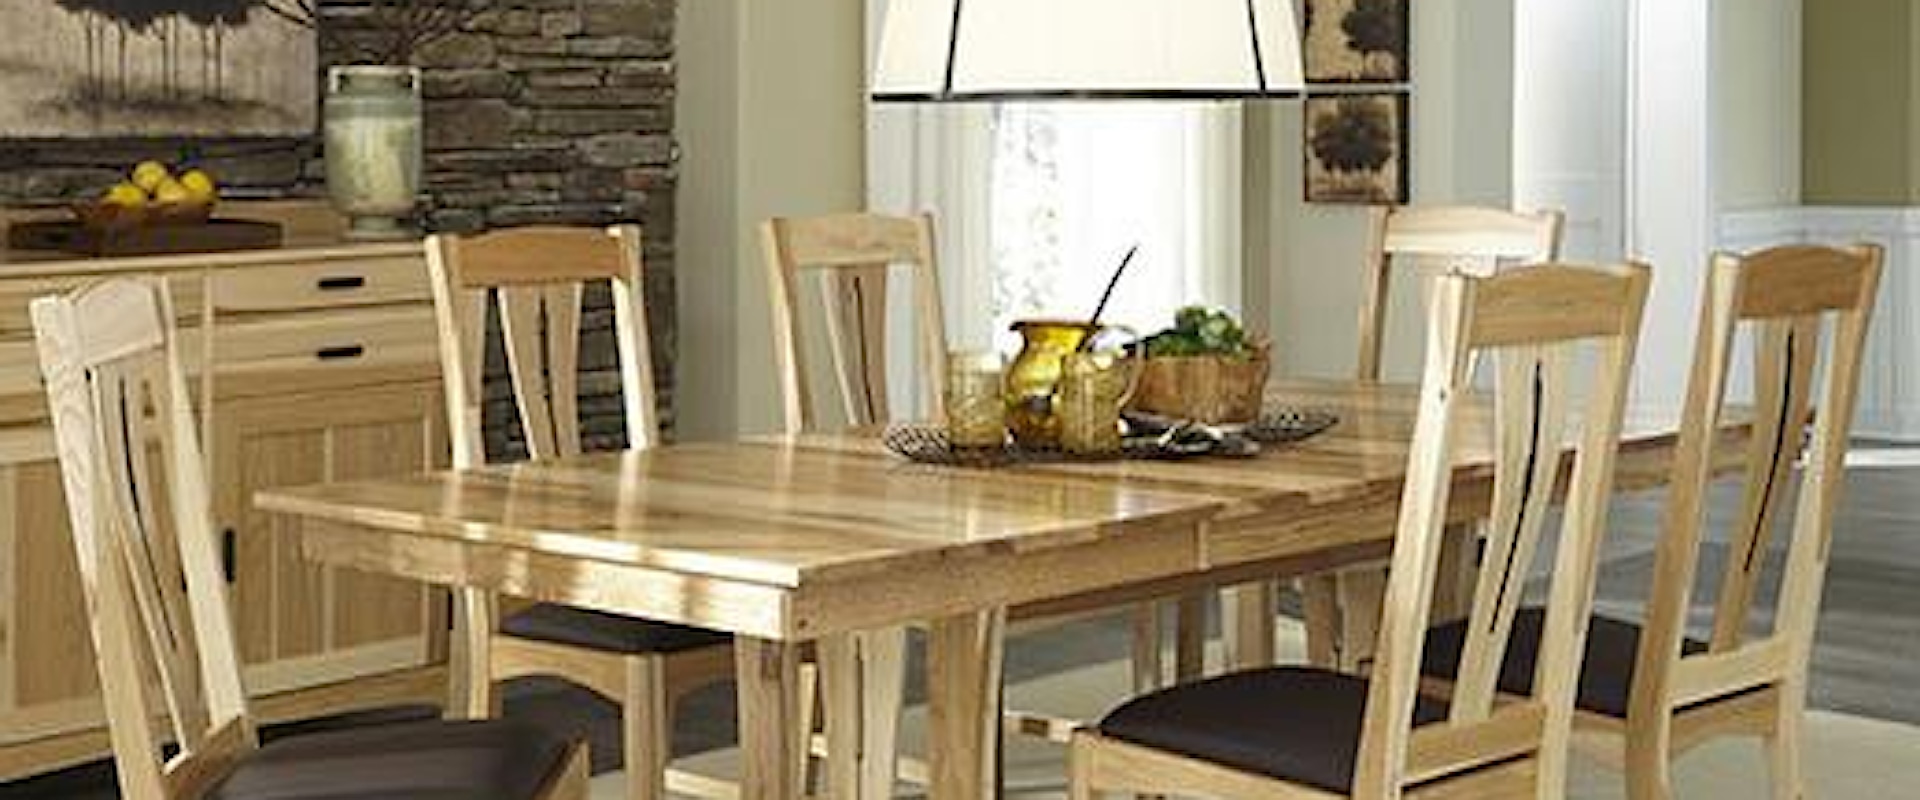 7-Piece Trestle Table Dining Set w/ 6 Side Chairs